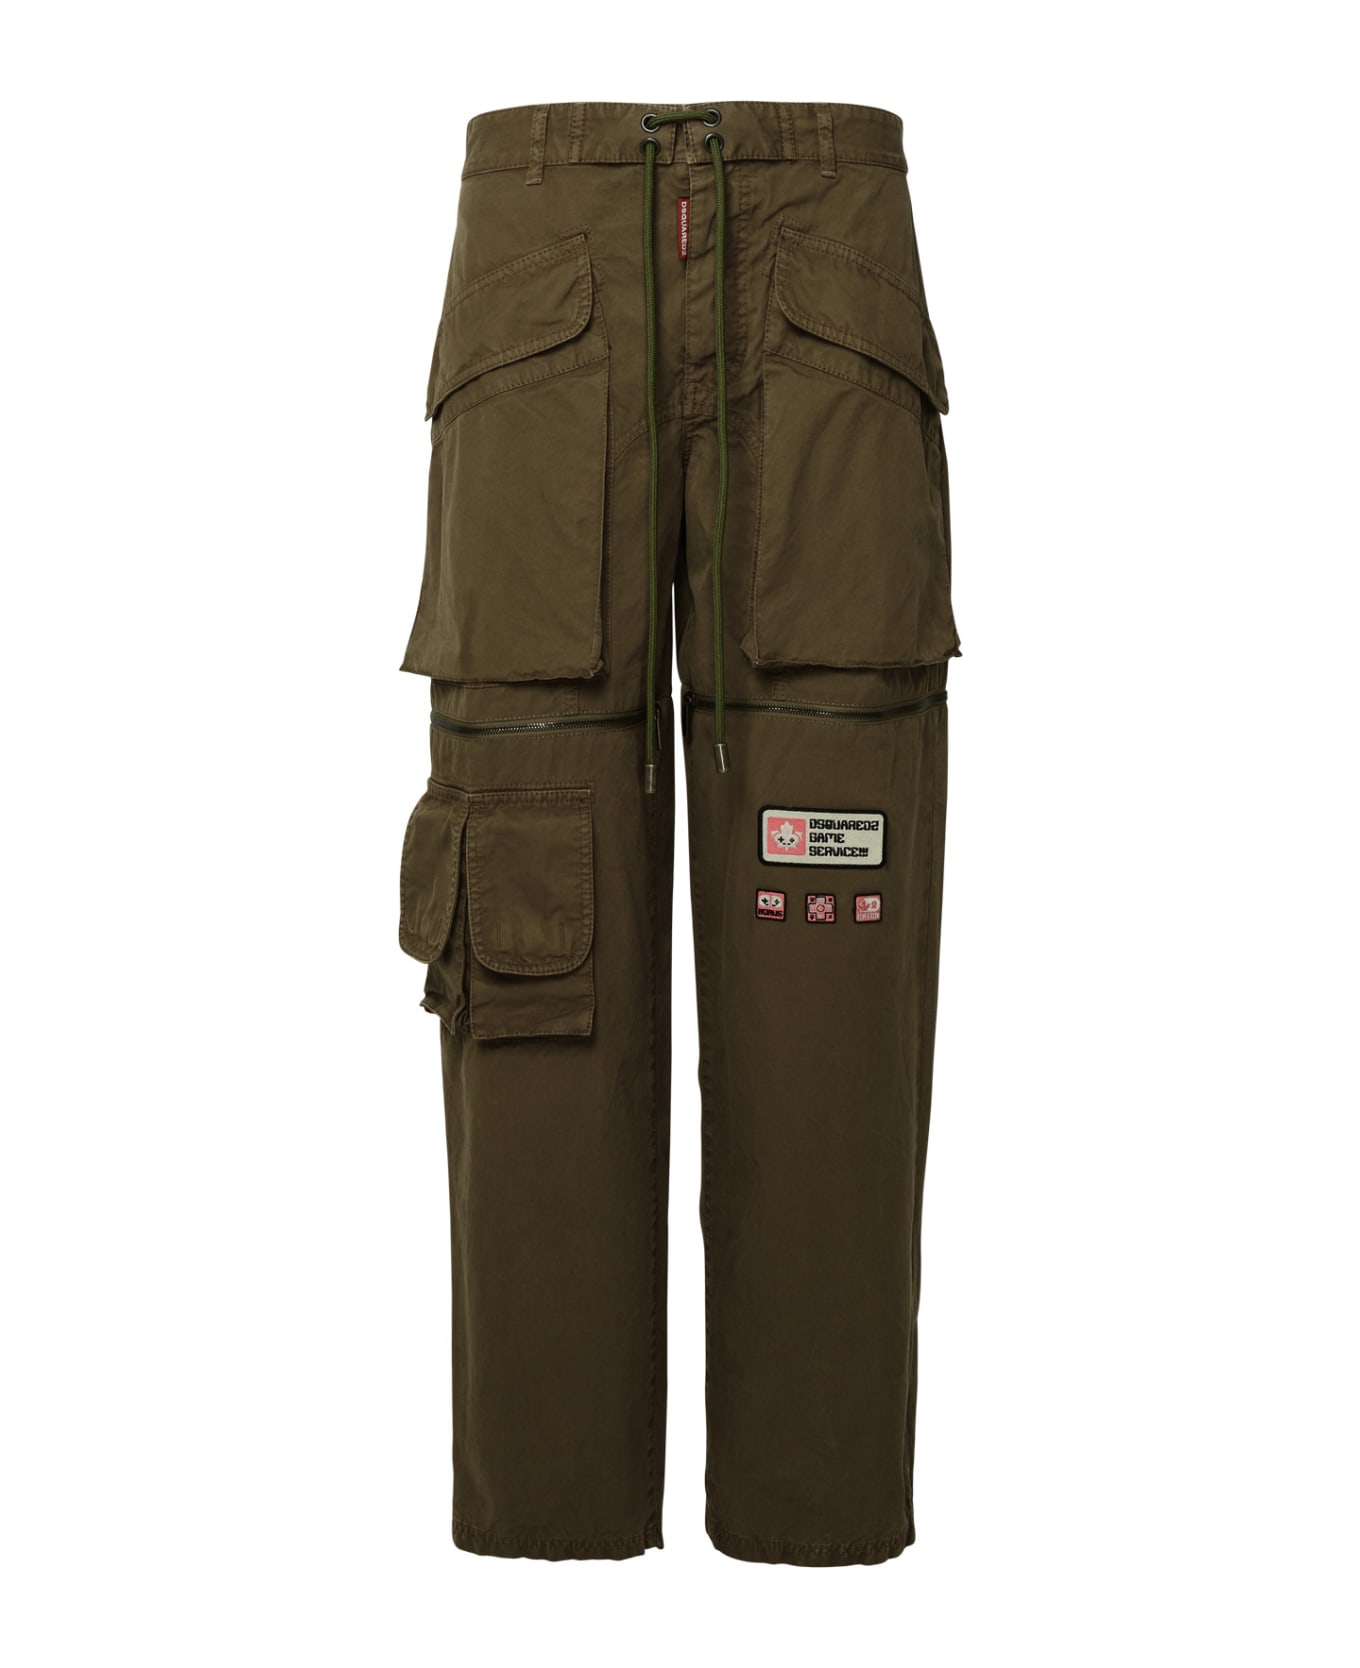 Dsquared2 Green Cotton Pants - Green